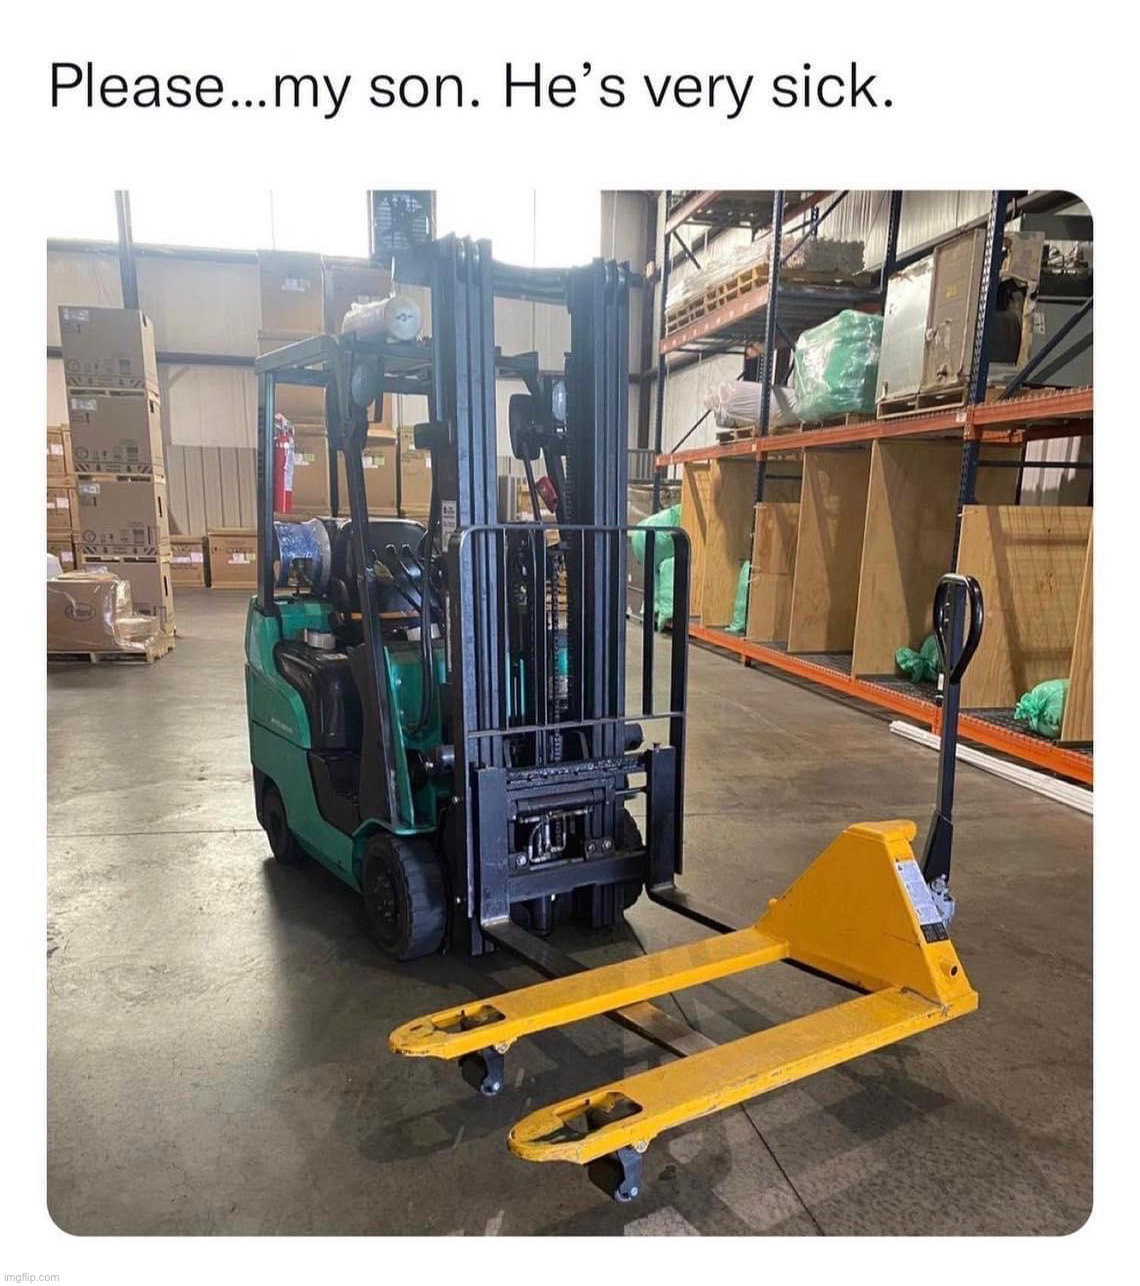 Fortklift son sick | image tagged in fortklift son sick | made w/ Imgflip meme maker